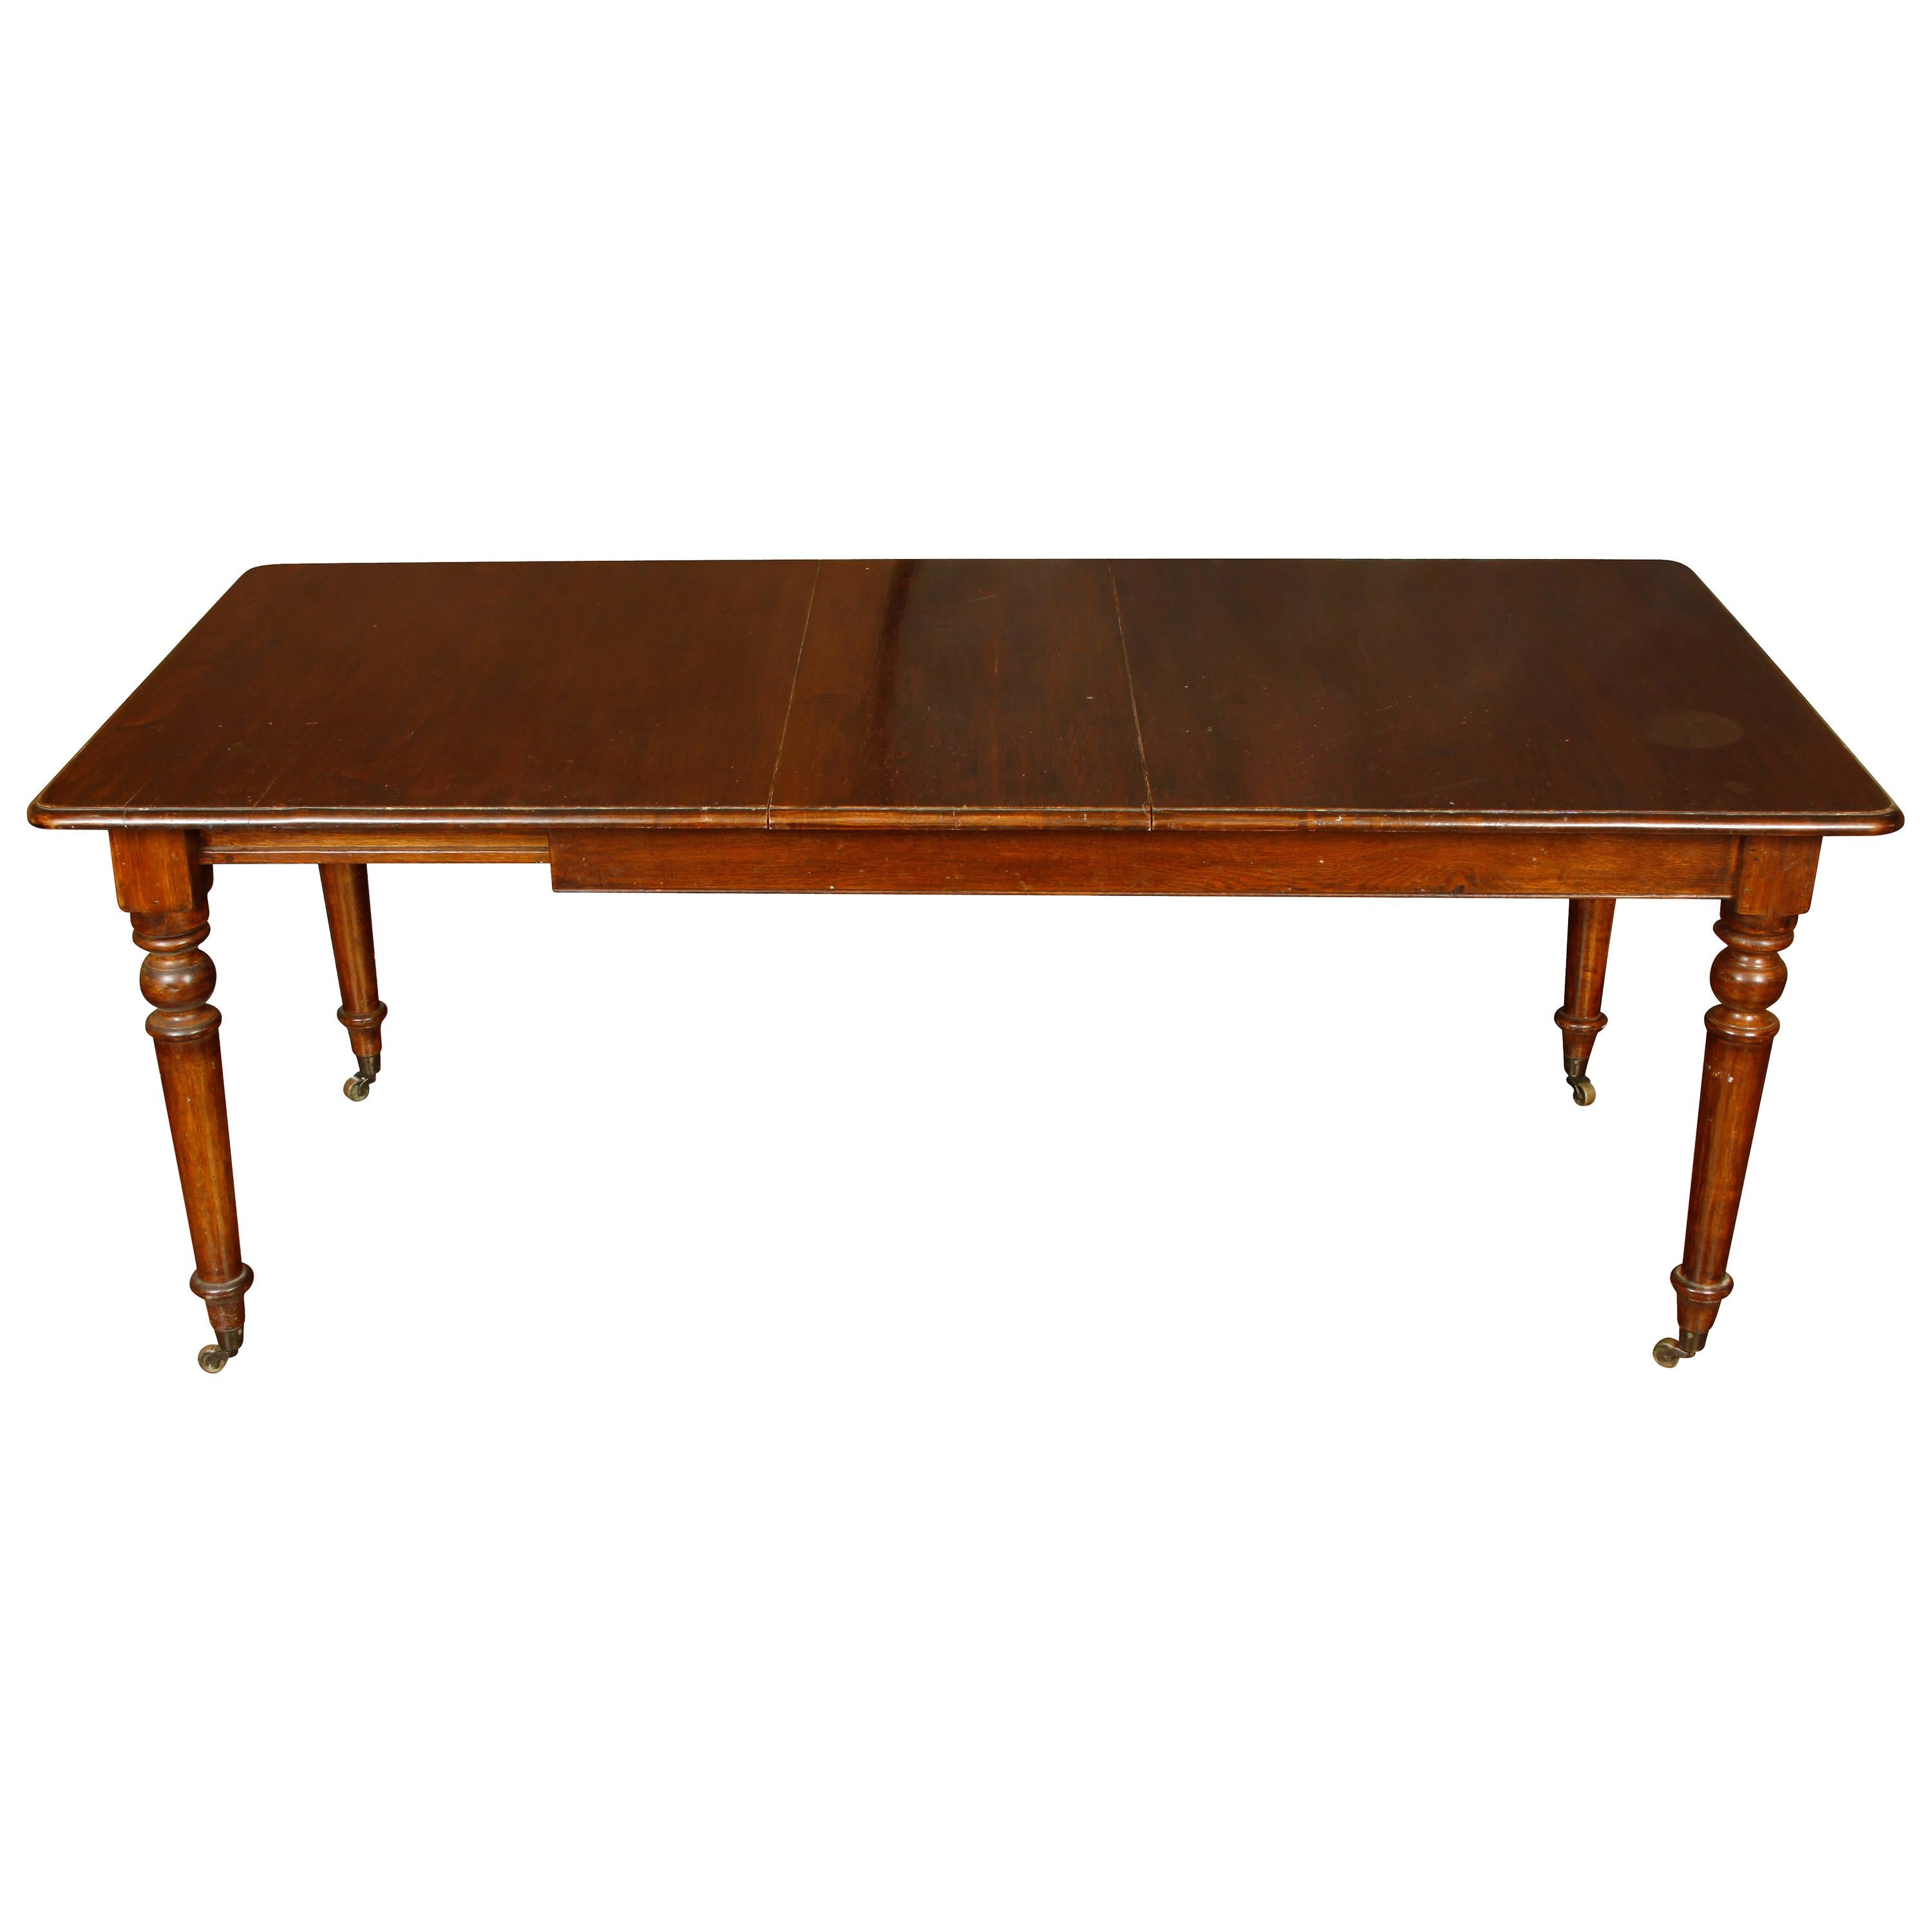 Vintage English Dining Table with One Leaf